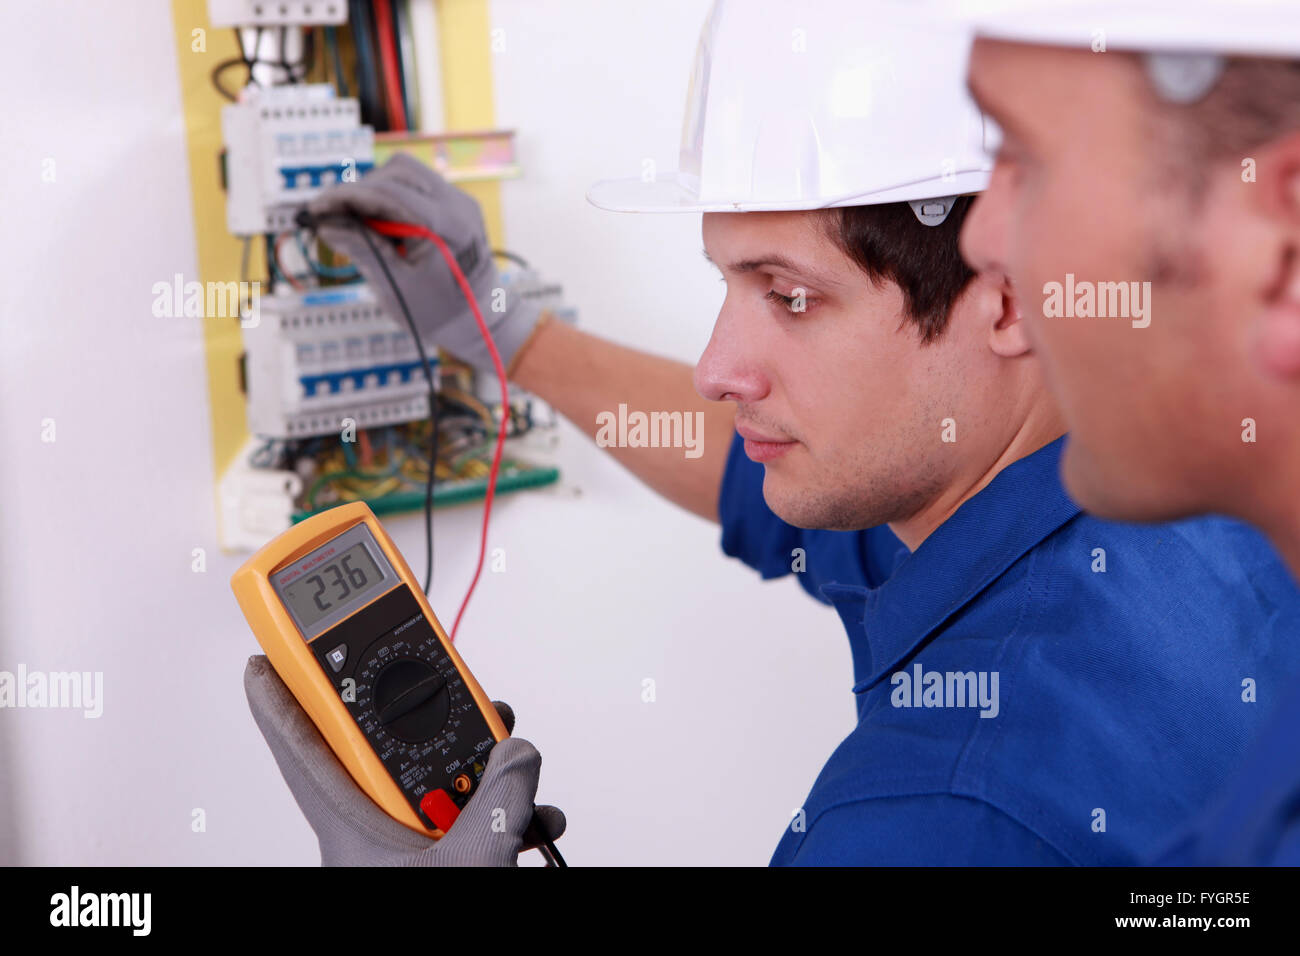 Two technical engineers checking electrical equipment Stock Photo